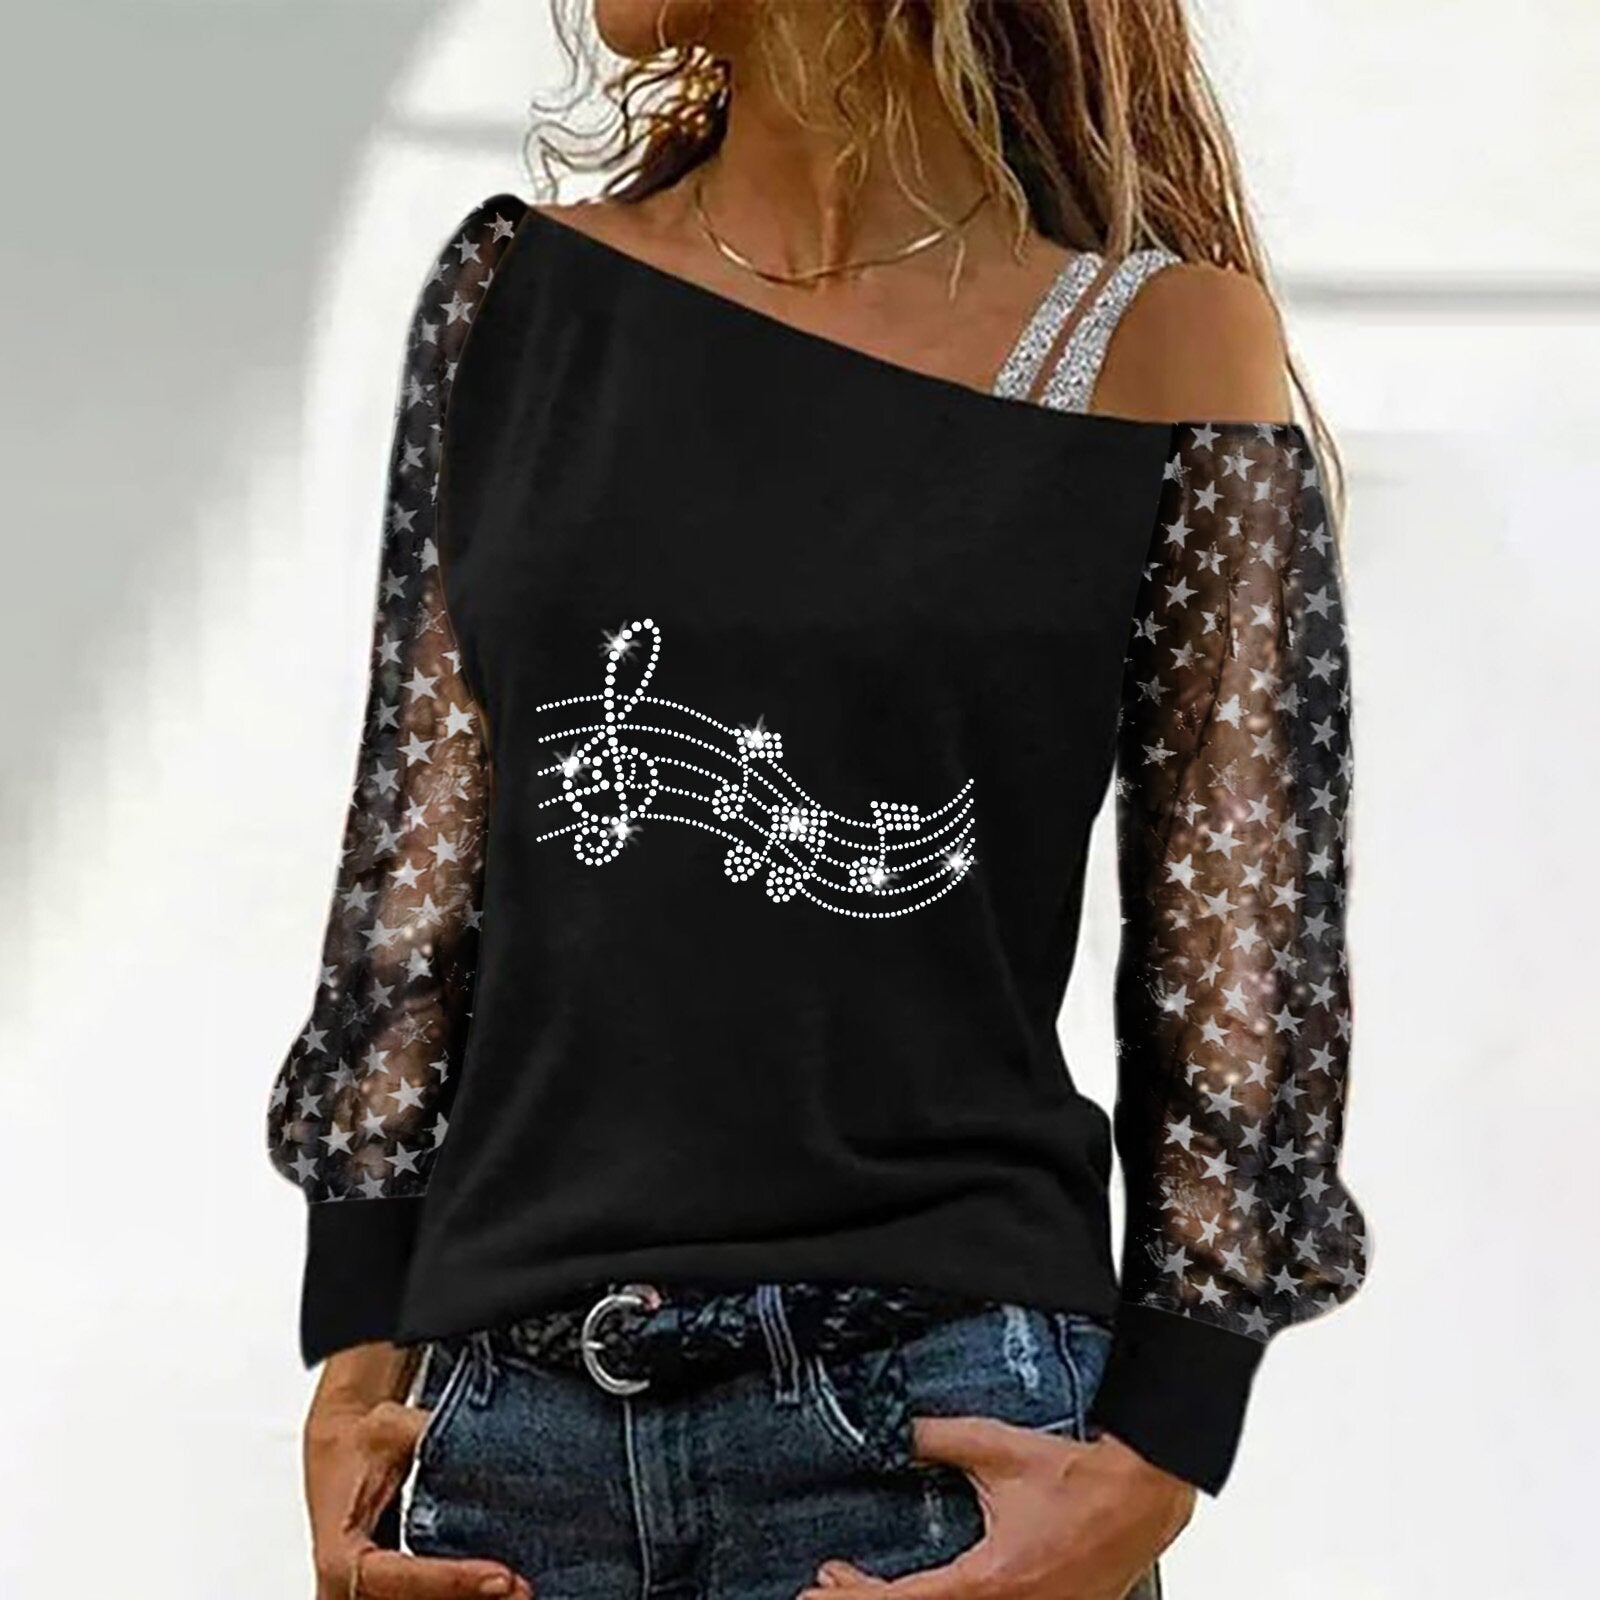 One off shoulder chic long sleeve black printed T-shirts